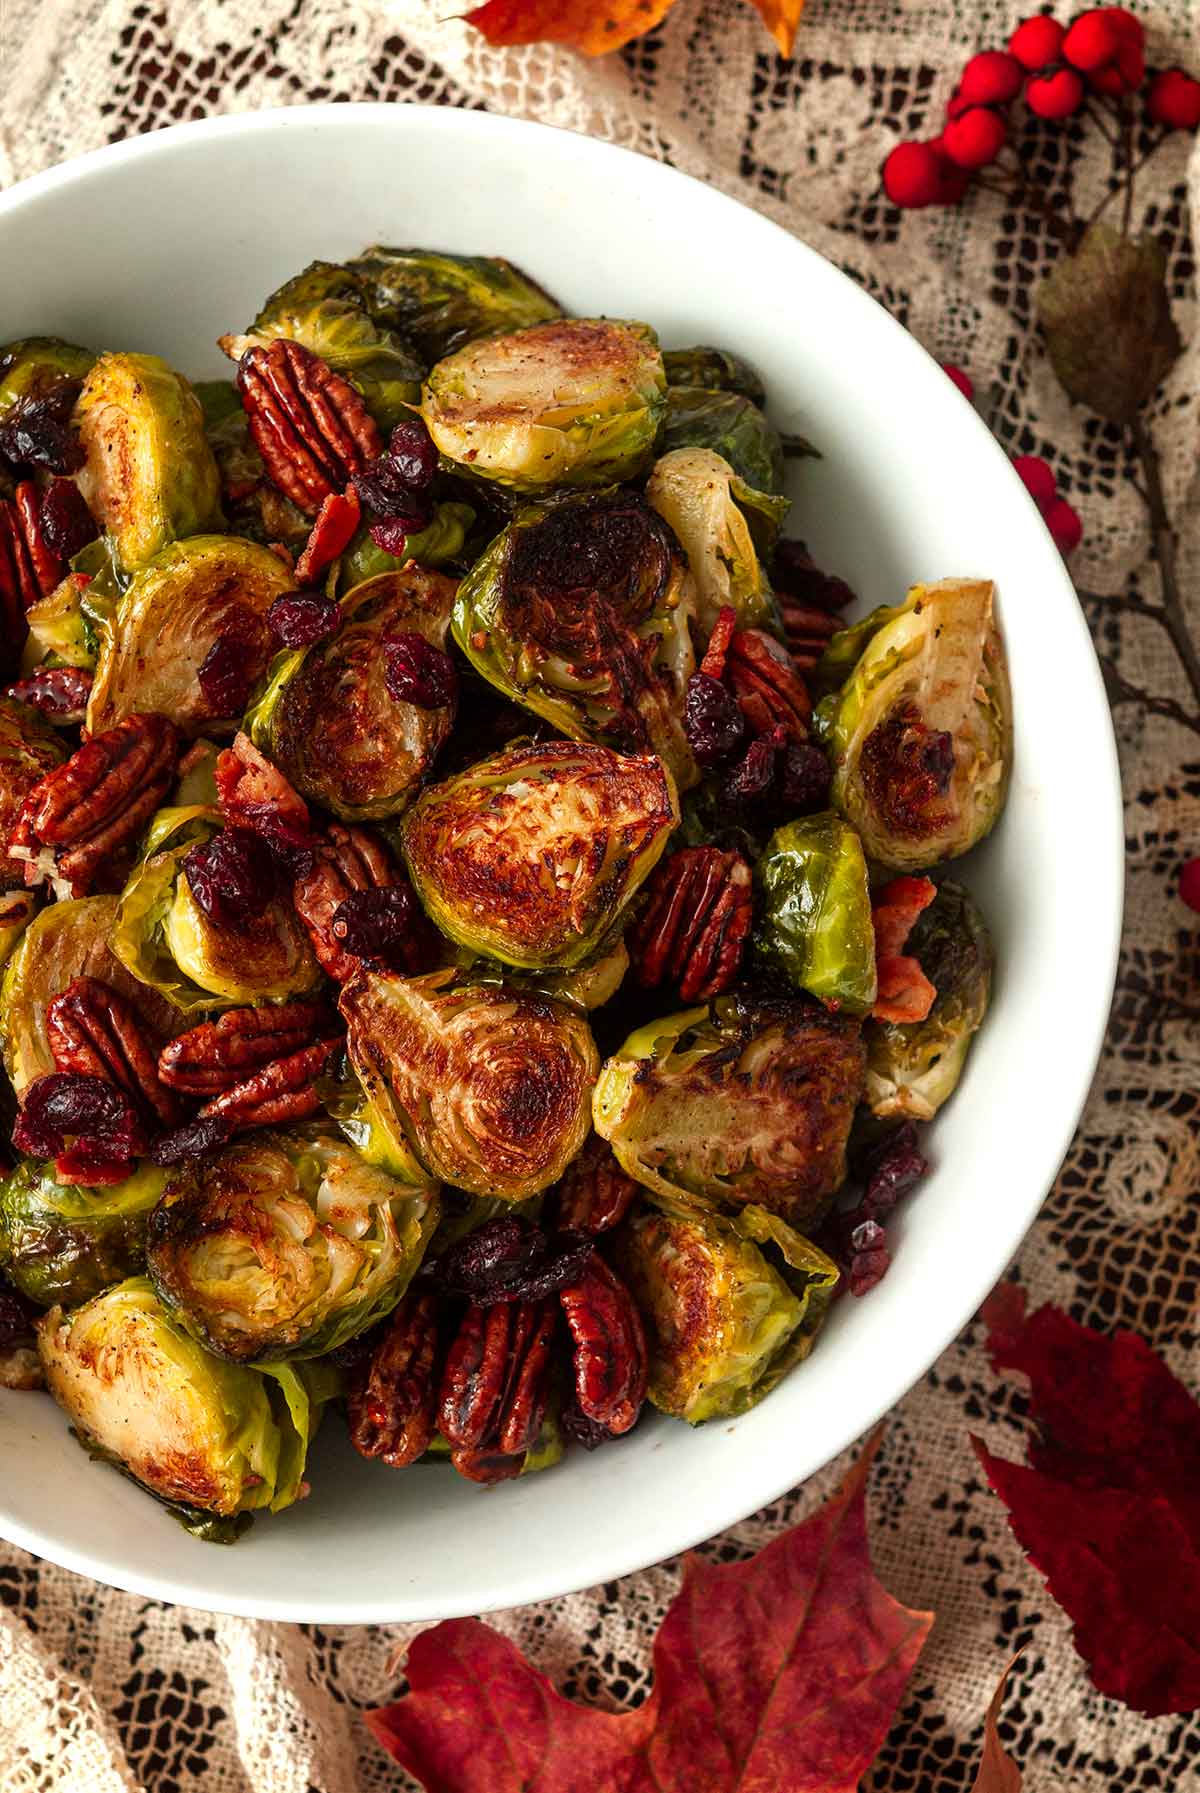 A bowl of Brussels sprouts, bacon, cranberries and candied pecans on a table with scattered leaves.